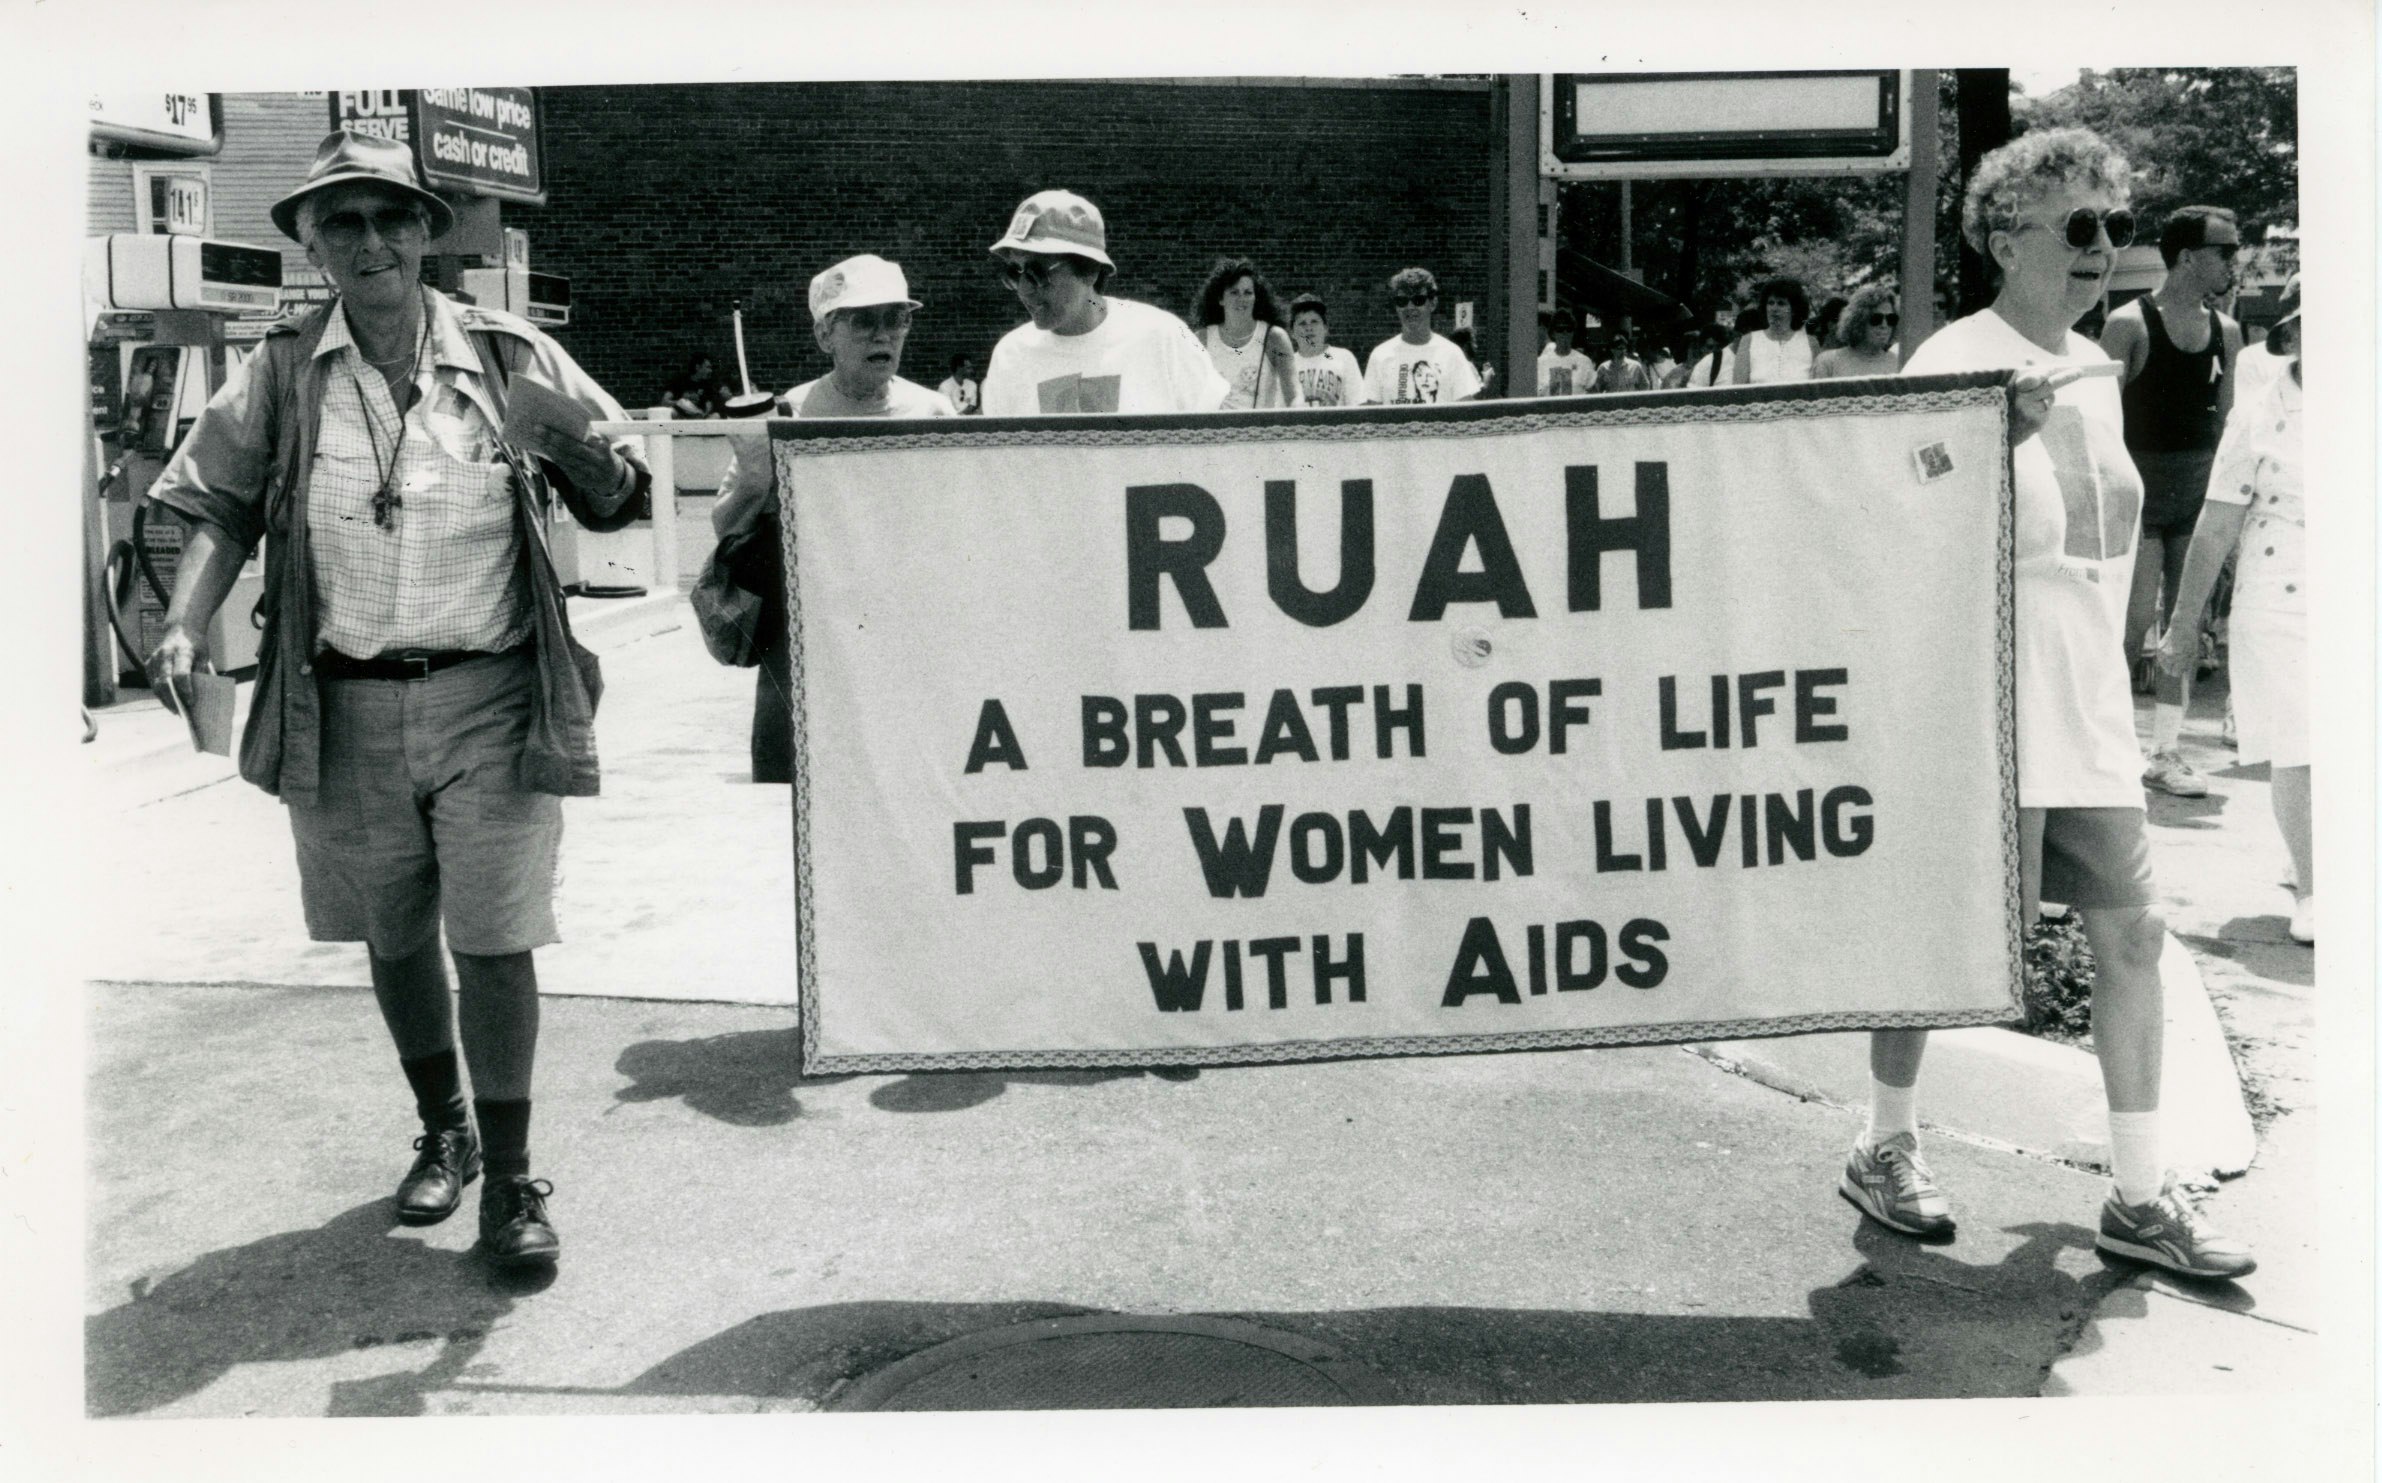 Kip Tiernan and Sr. Jeanette marching with Ruah (interfaith organization) banner. Text reads "A breath of life for women living with AIDS", 1991